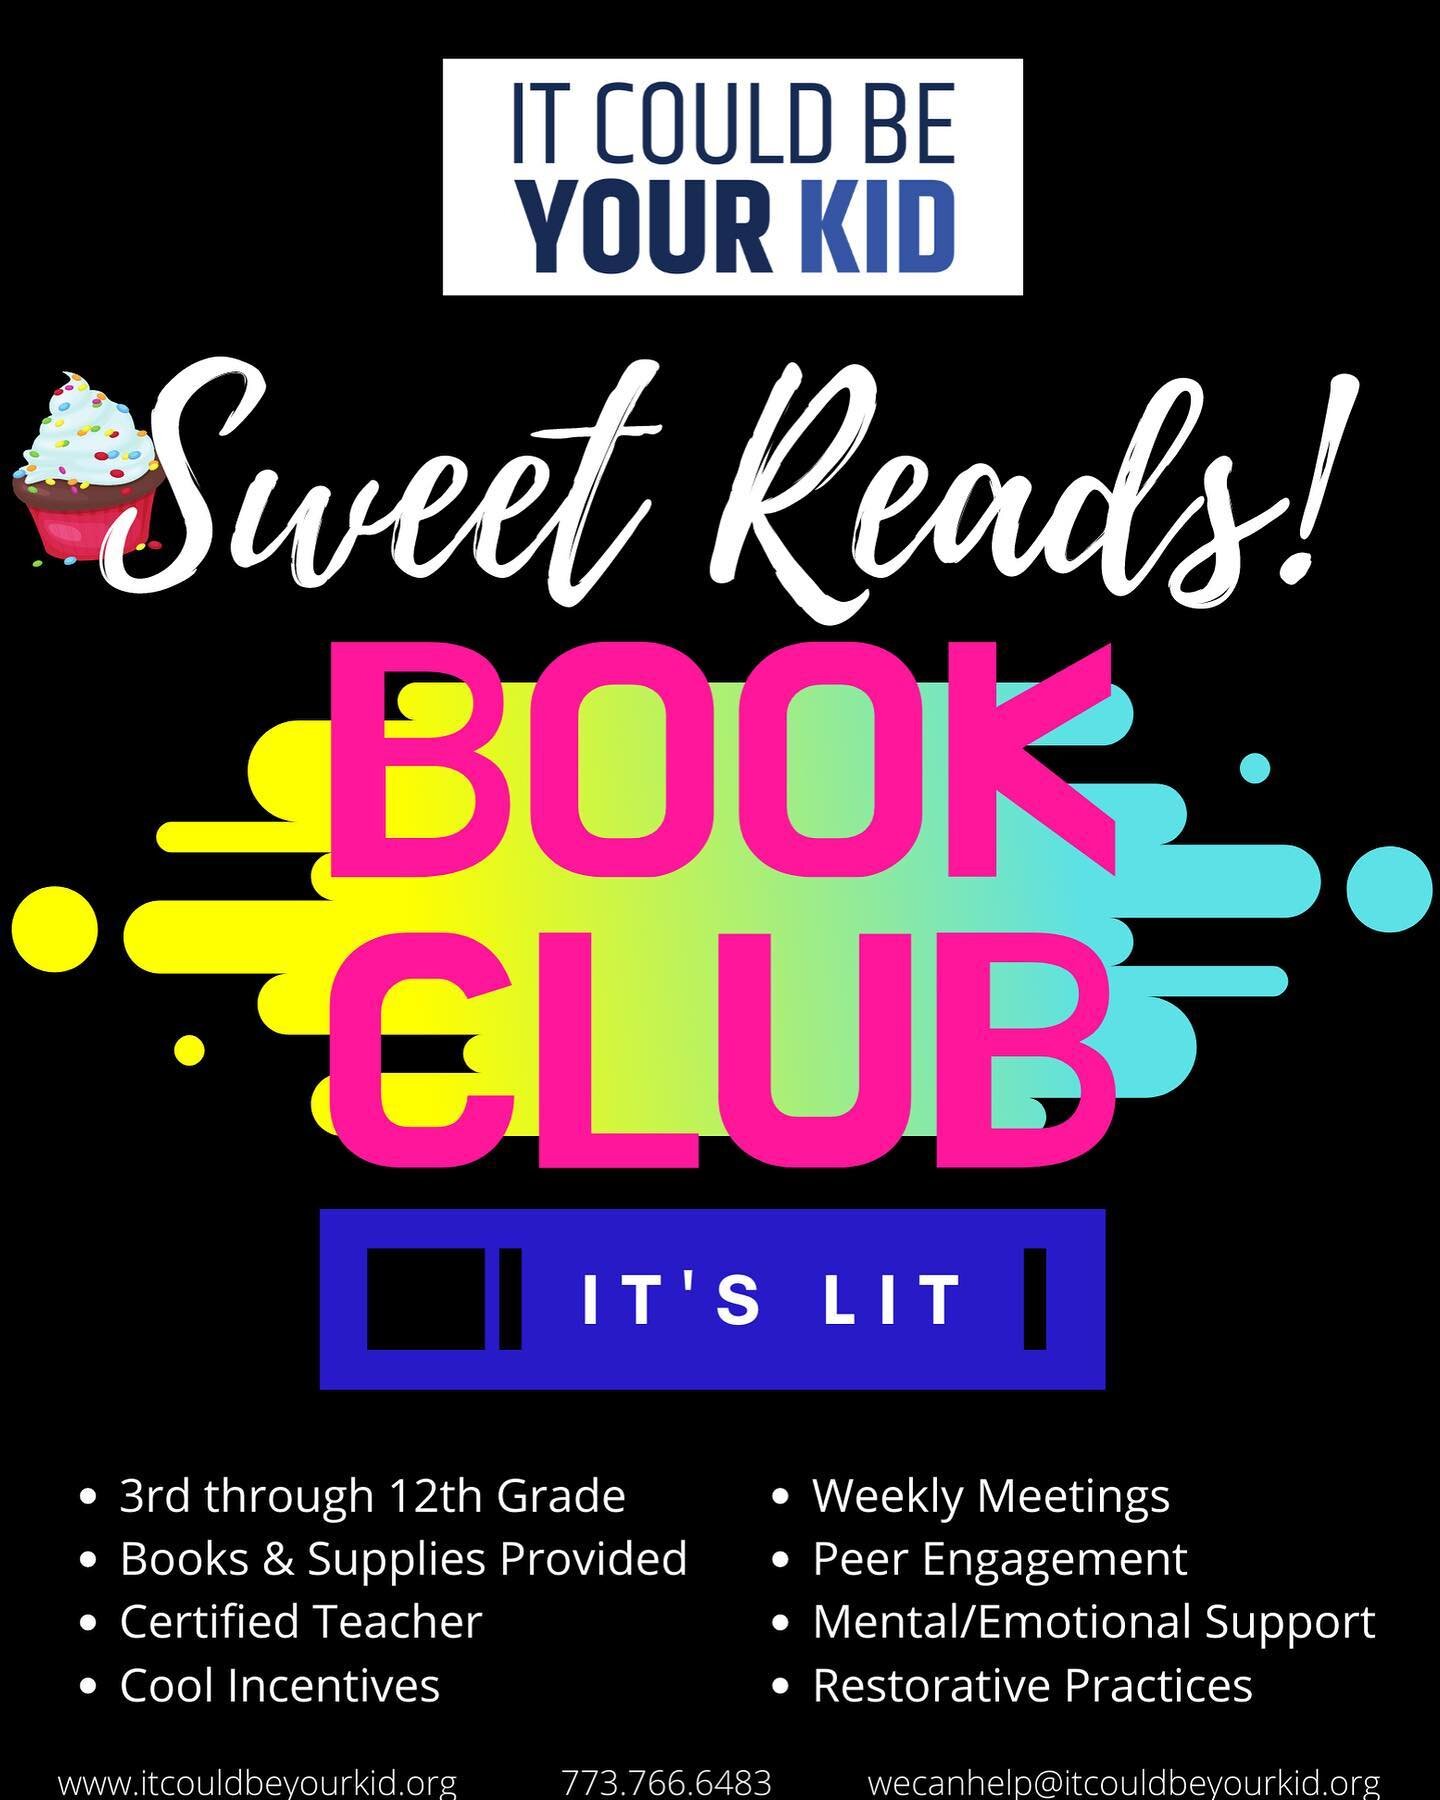 💙

This is the FINAL week of Sweet Reads! Book Club🥺🥺🥺

Until the fall season🥸🤣

#SweetReads #SweetReadsBookClub #WeNeedMoreDiverseBooks #Literacy #BullyingPrevention #AntiRacism Education #SocialEmotionalLearning #ItCouldBeYourKid #ICBYK 💙